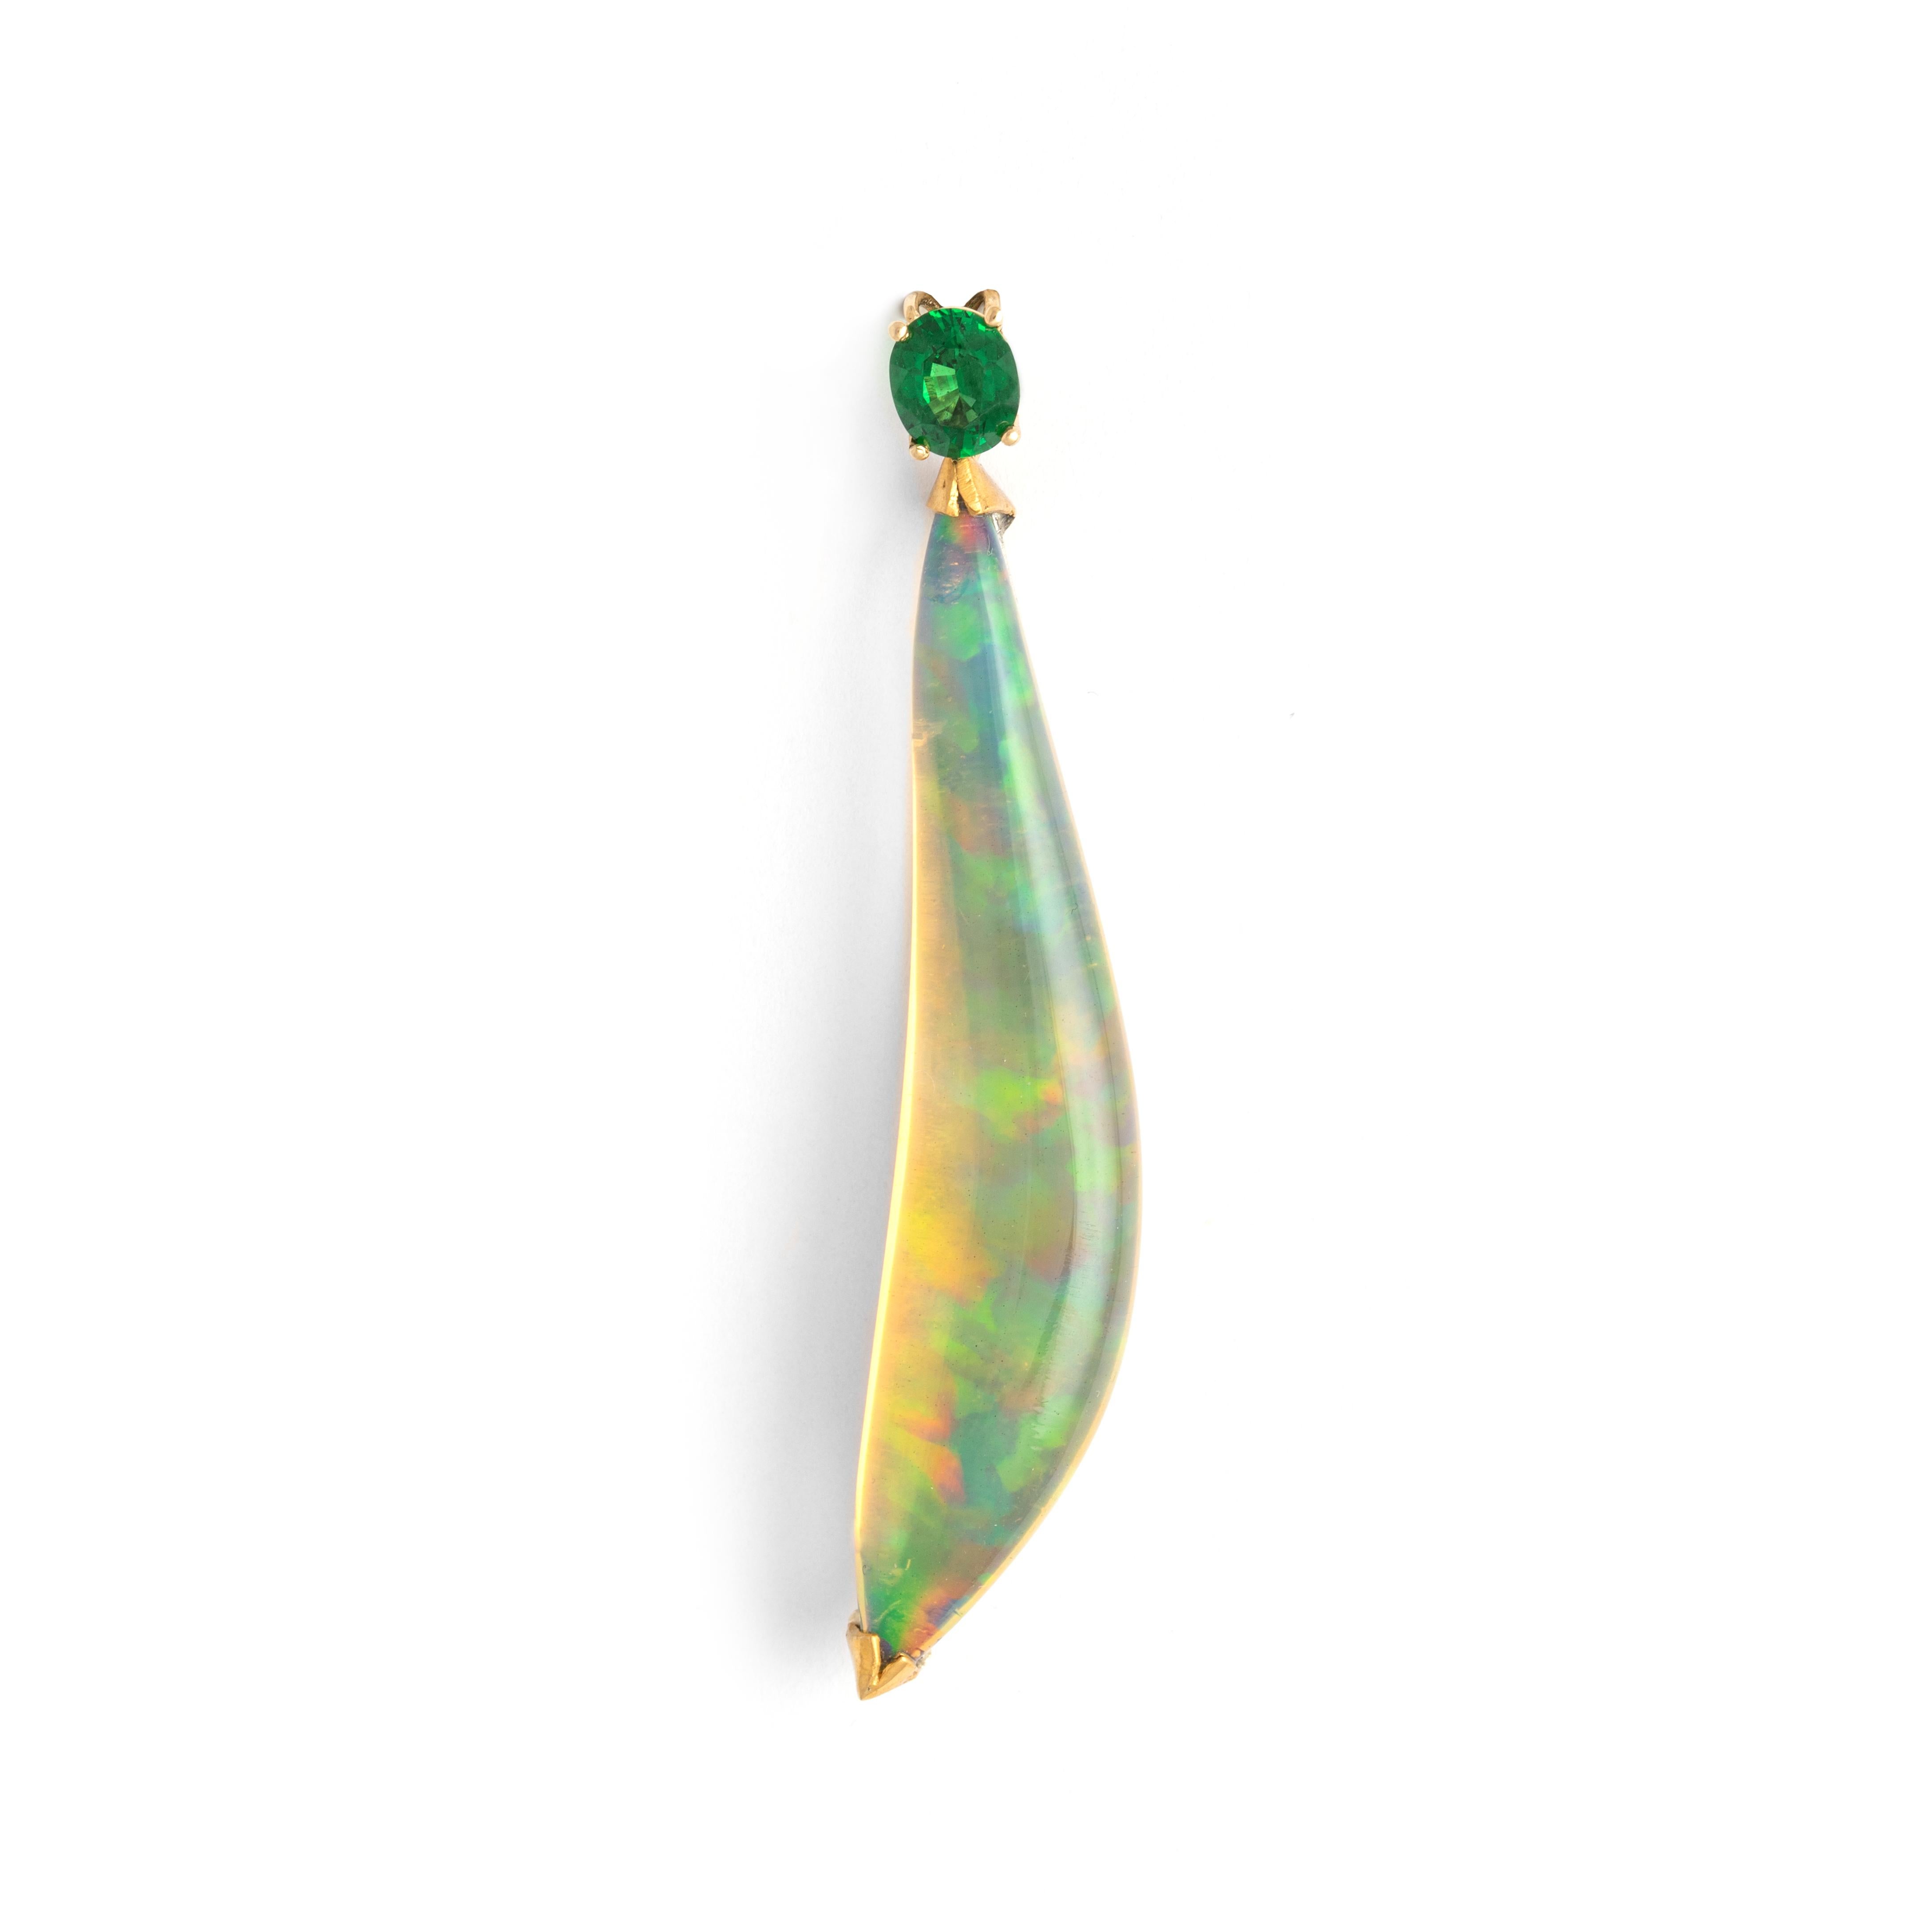 Pendant named 'Horn of Africa' composed by a one carat Tzavorite ( from Tanzania) along with a free form Opal from 